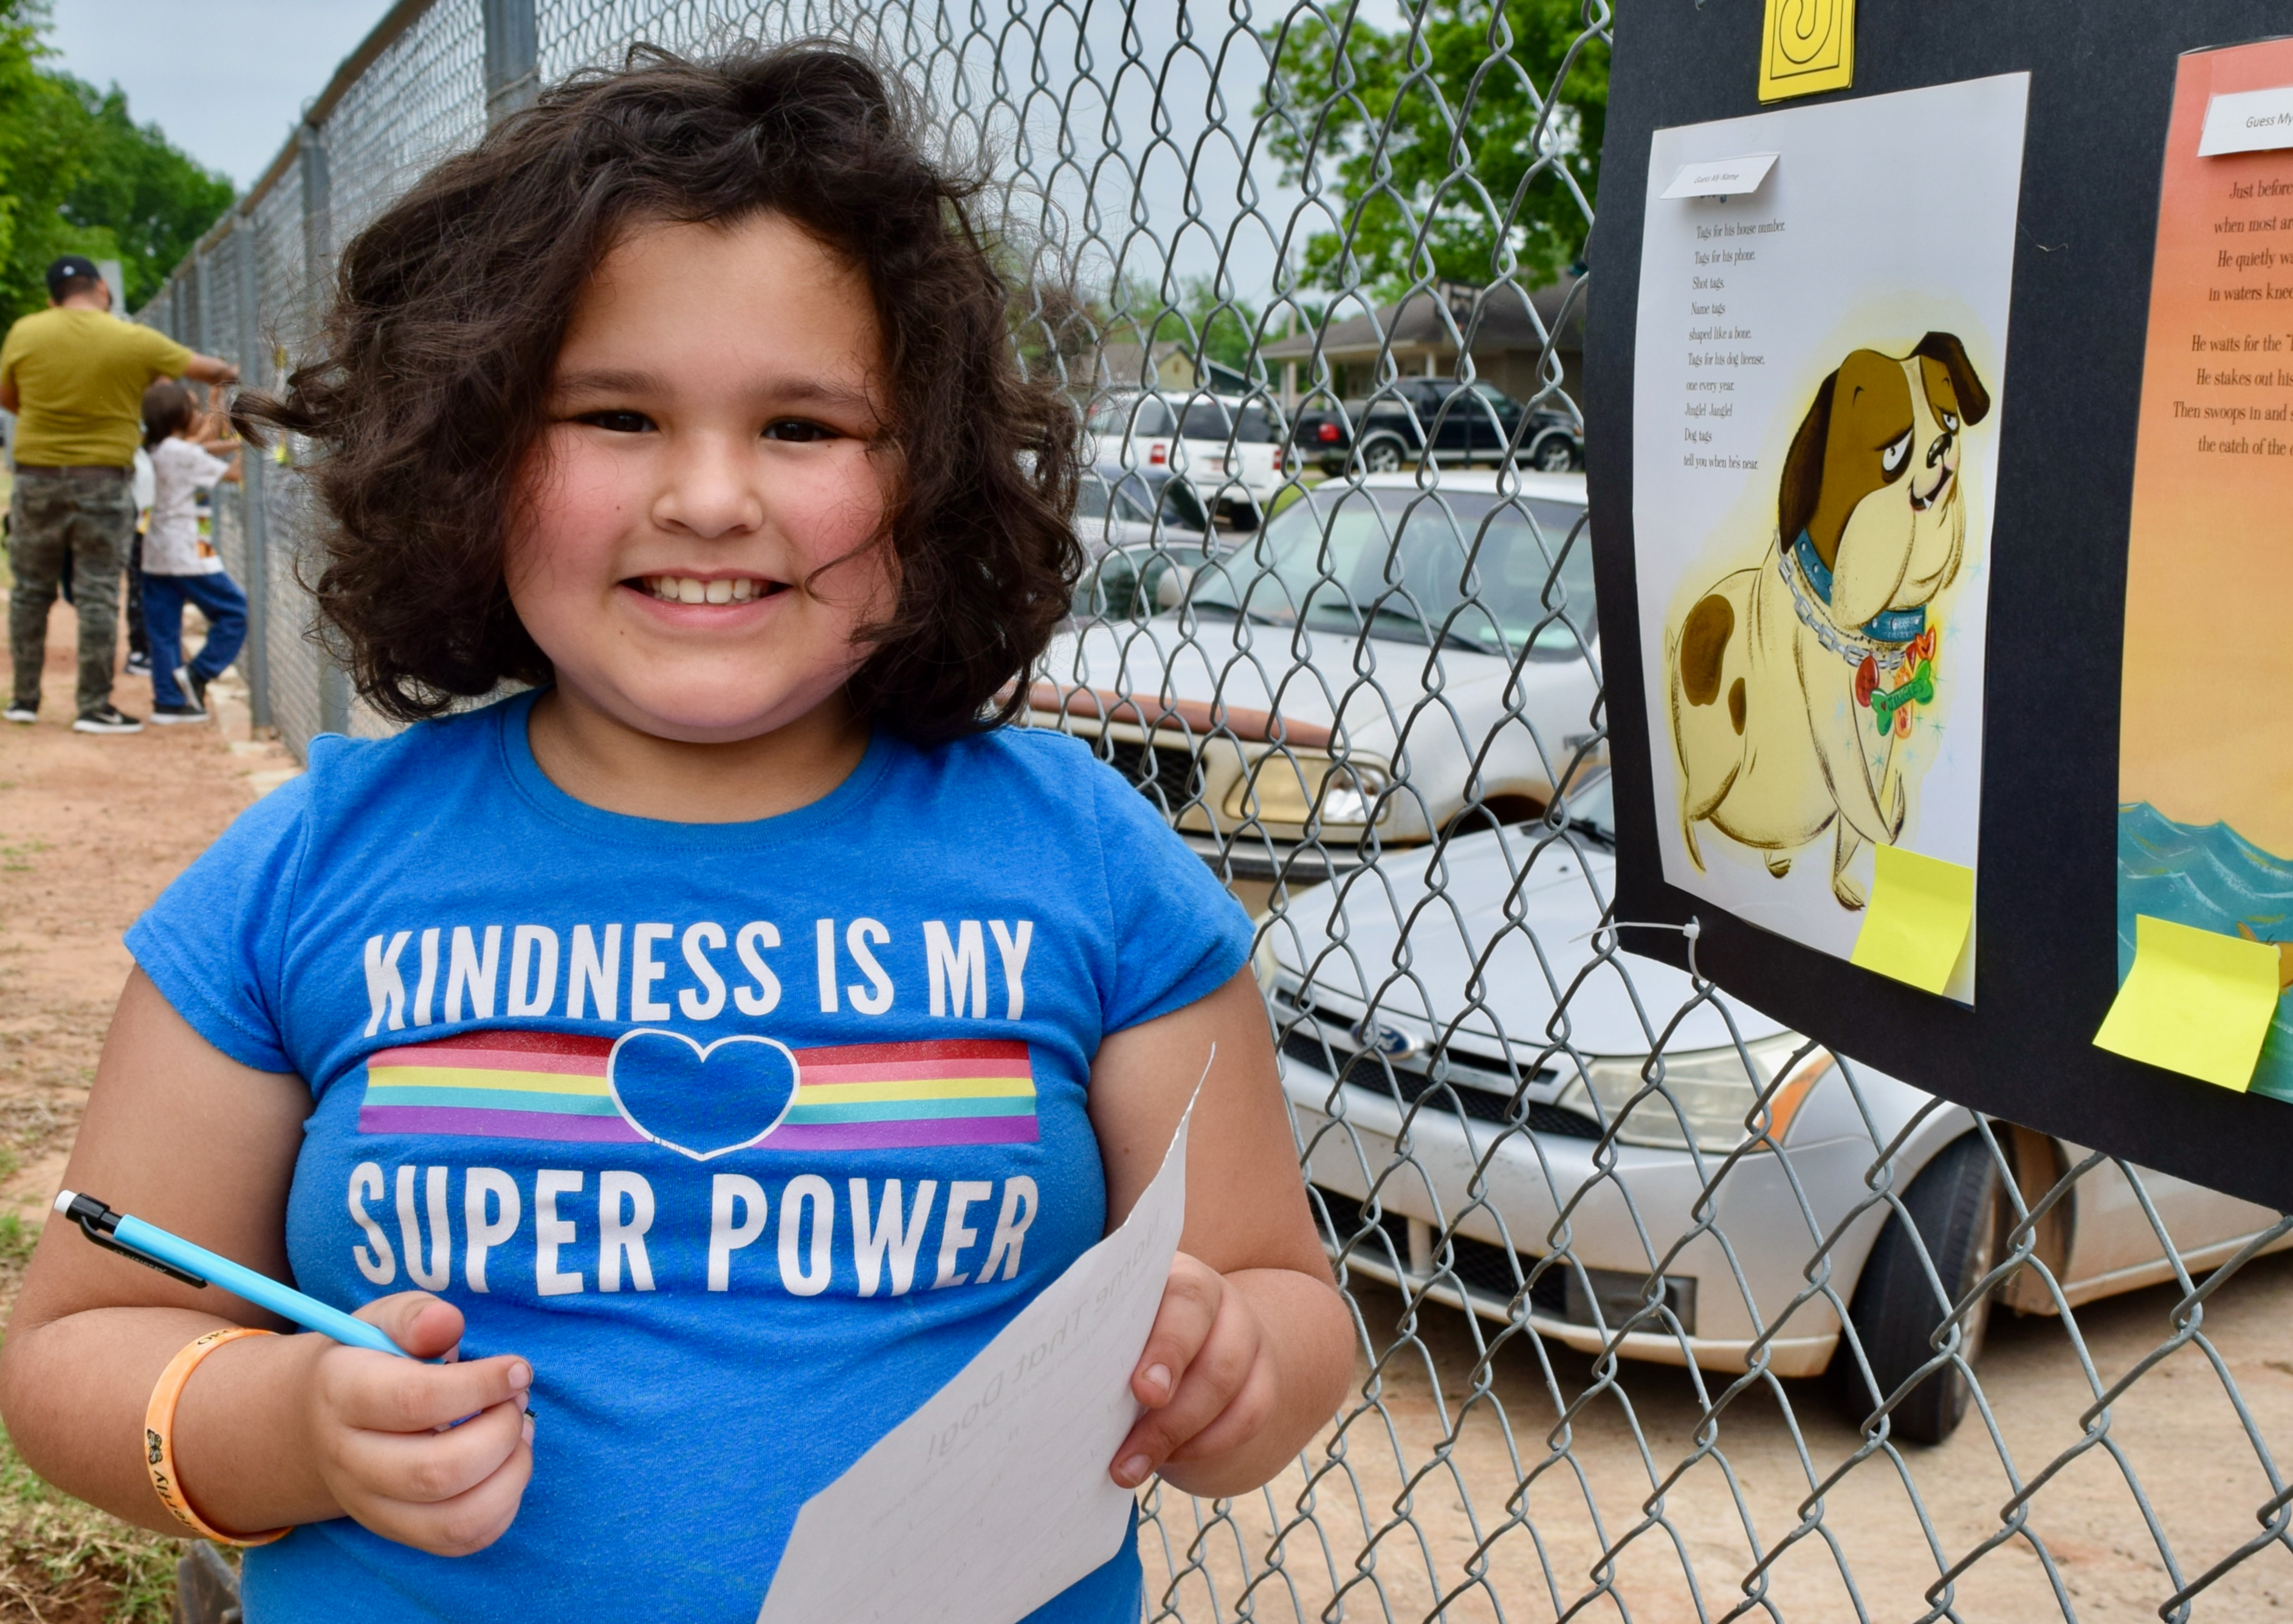 a girl wearing a shirt reading kindness is my super power stands next to a fence. she is holding a pencil and paper, and pages from a book are on the fence